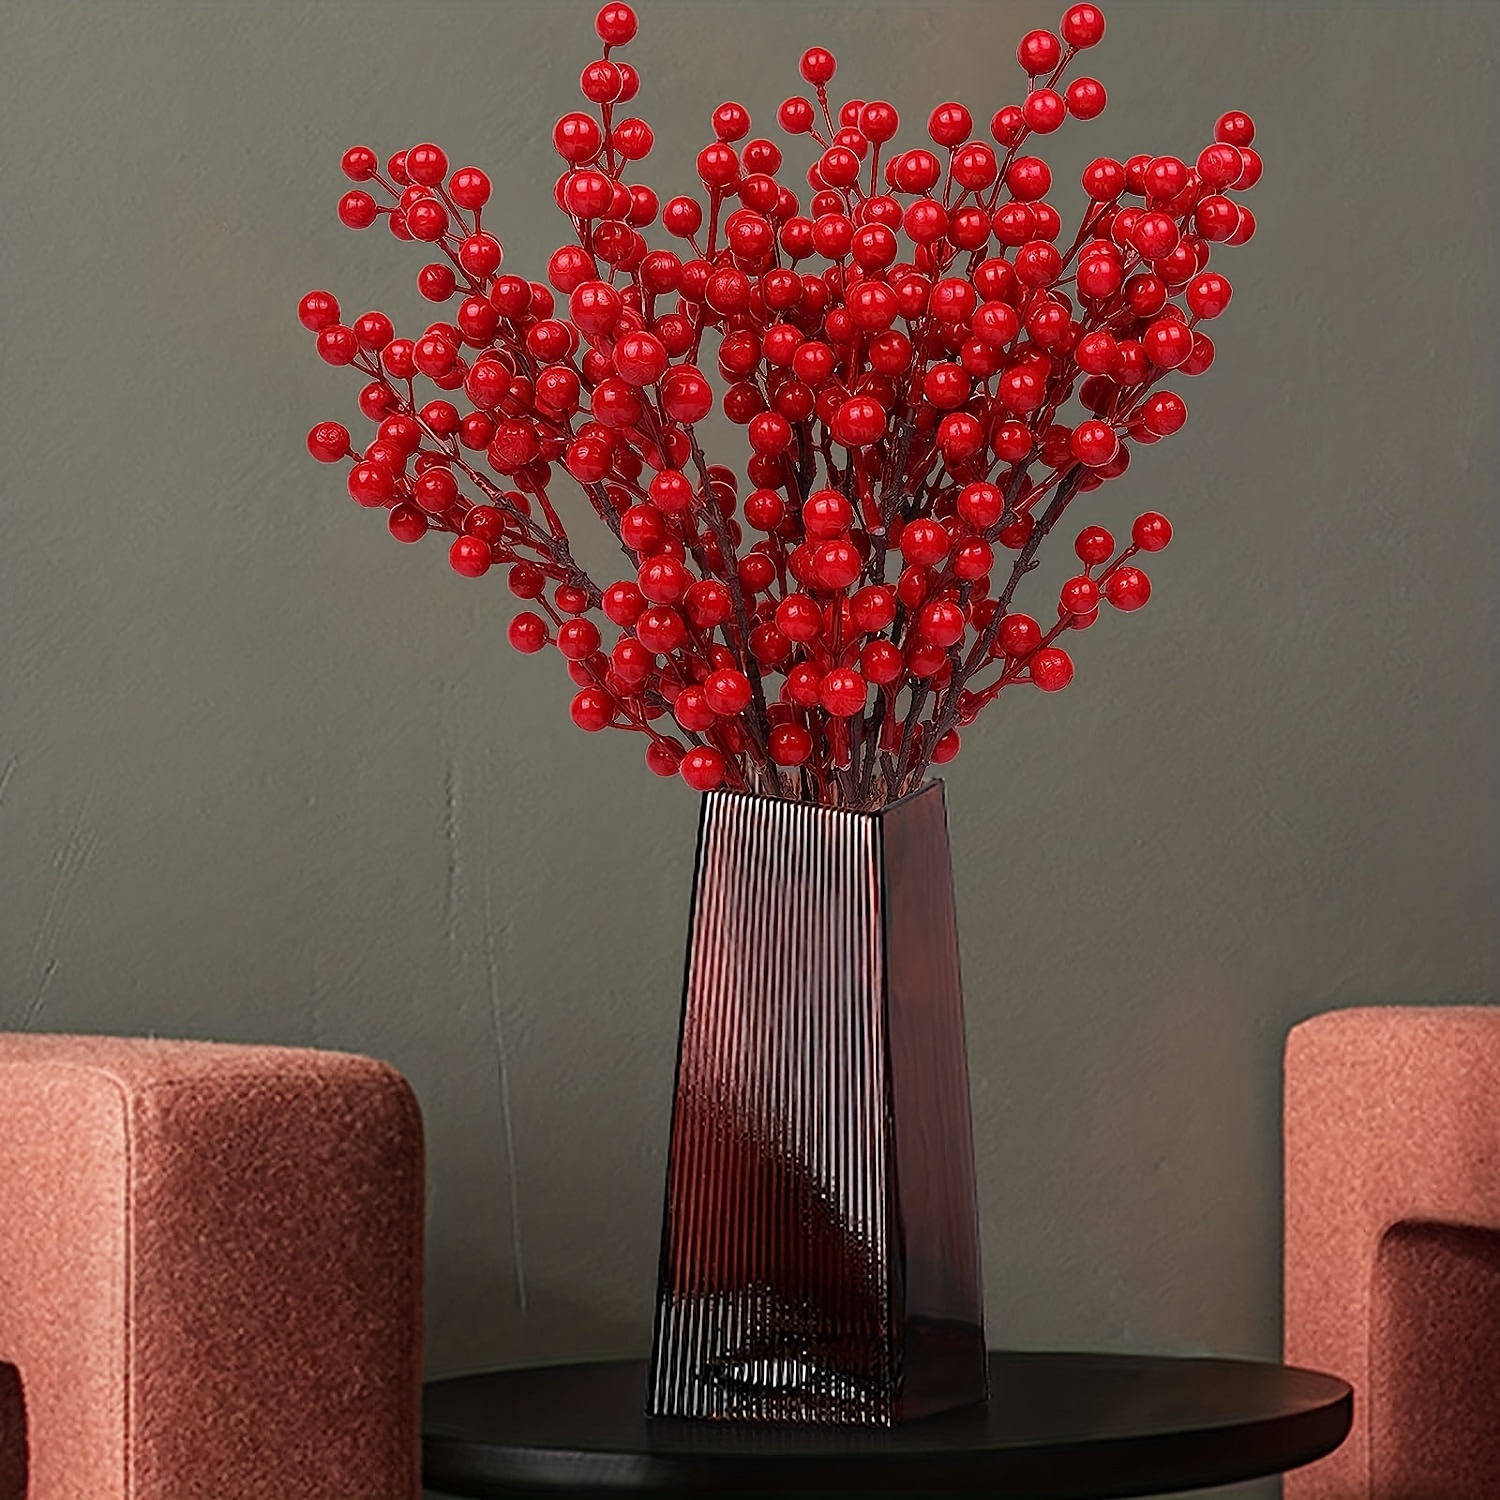 Christmas Tree Picks Berry Stems: 12 Pcs Red Berry Picks Artificial Xmas  Party Table Centerpiece Floral Arrangement Winter Holiday Decorations For  Diy